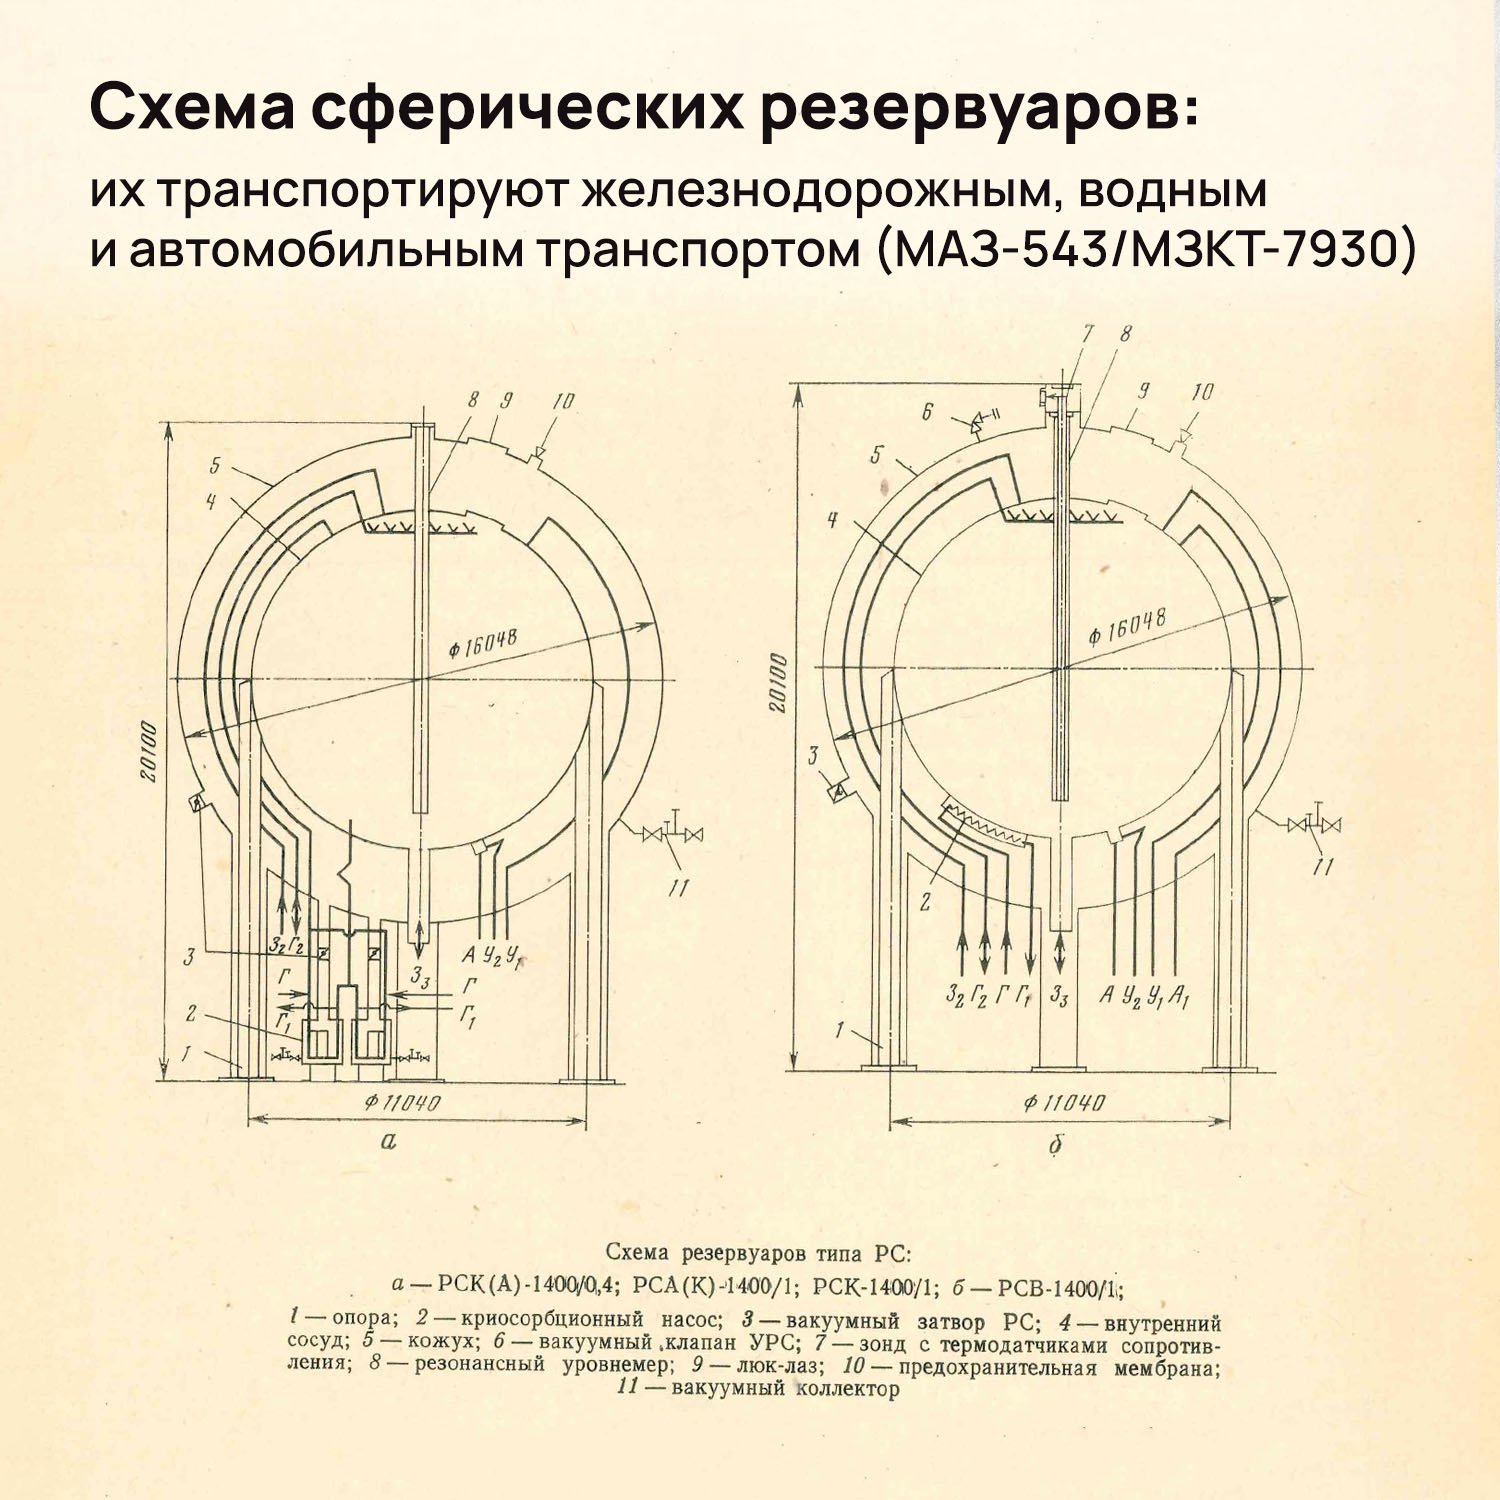 The Big Soviet Death Star: what did Cryogenmash declassify for Pro Space? - Longpost, Hydrogen engine, Space, Cosmonautics, My